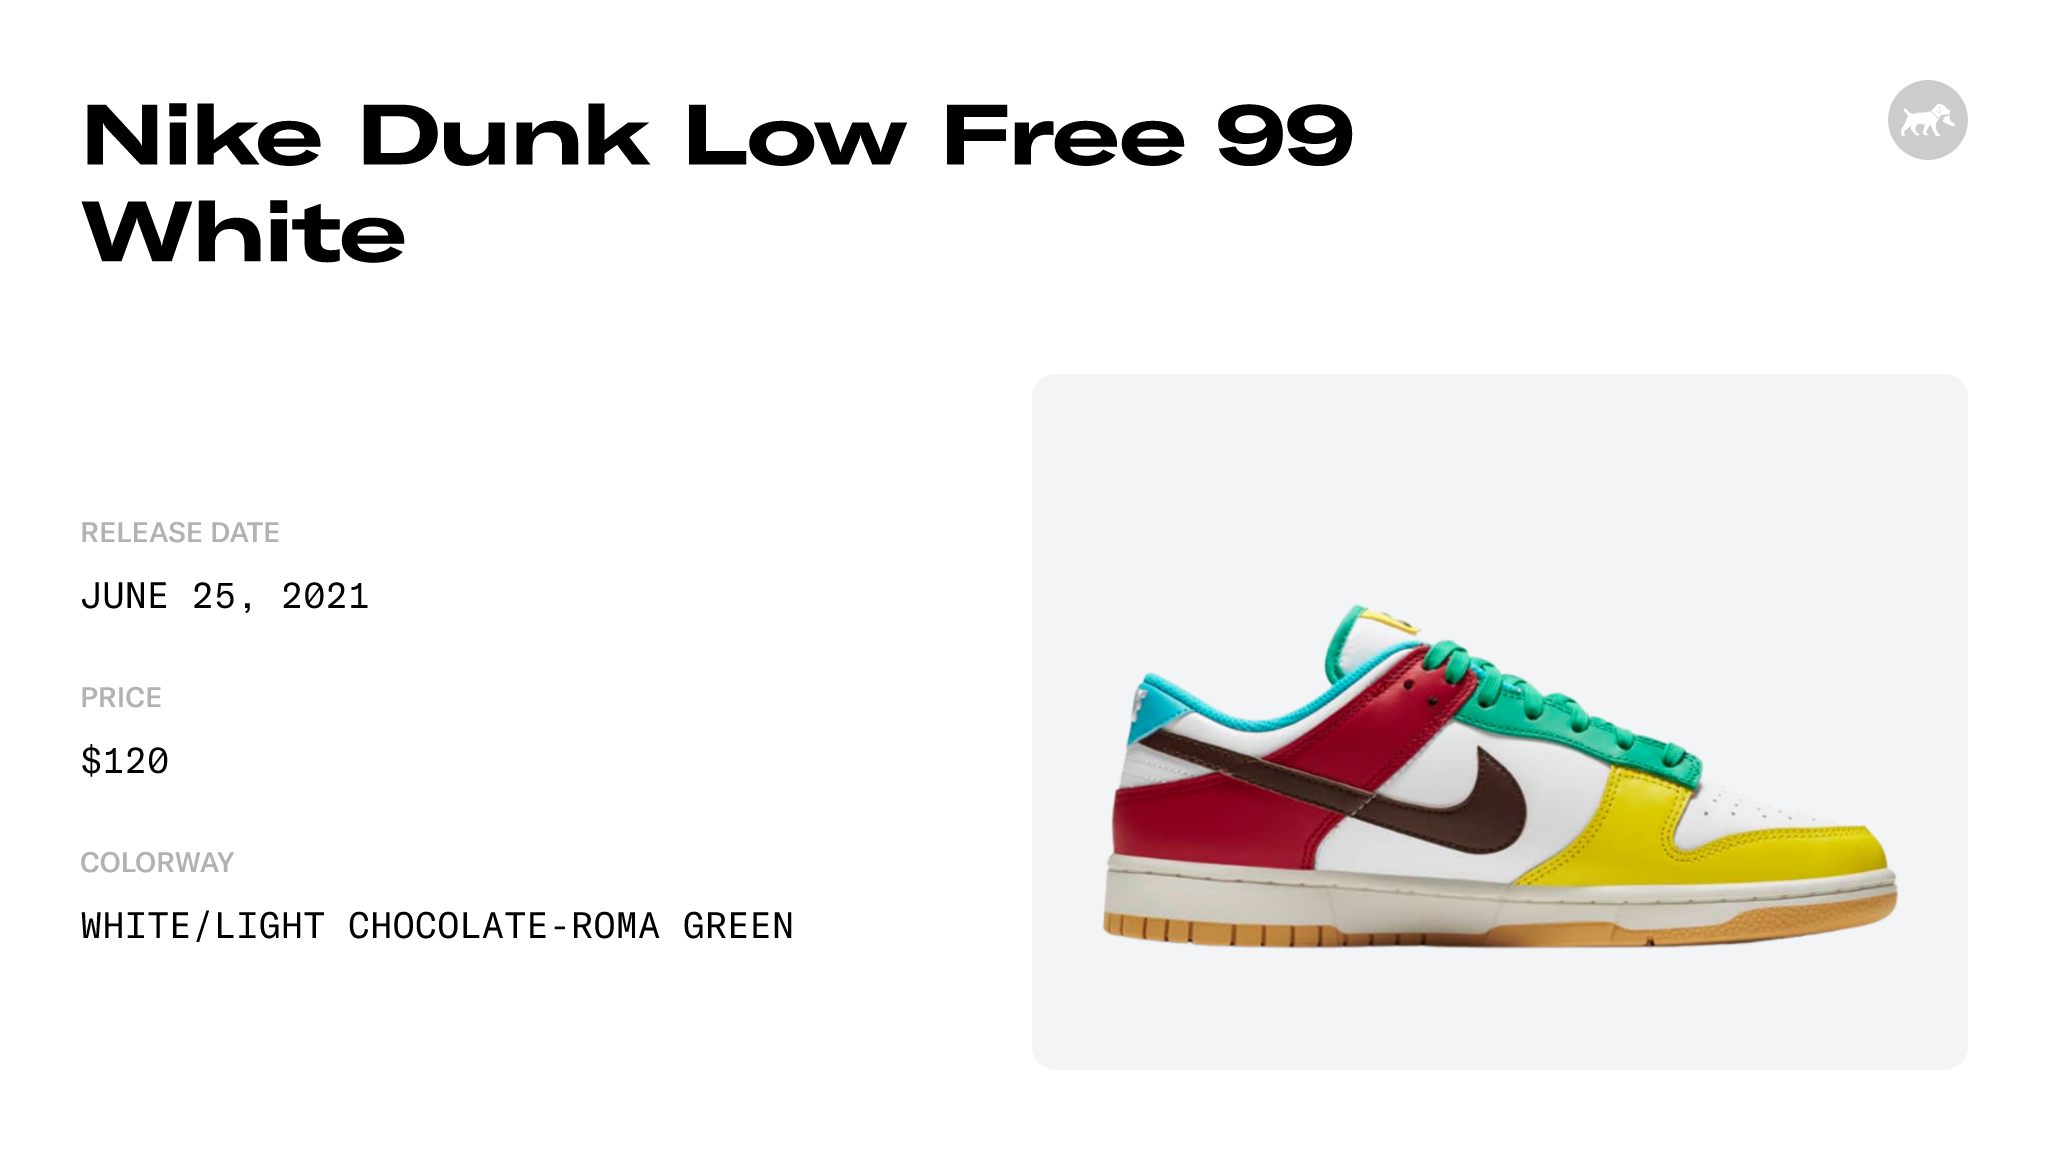 Nike Dunk Low Free 99 White - DH0952-100 Raffles and Release Date